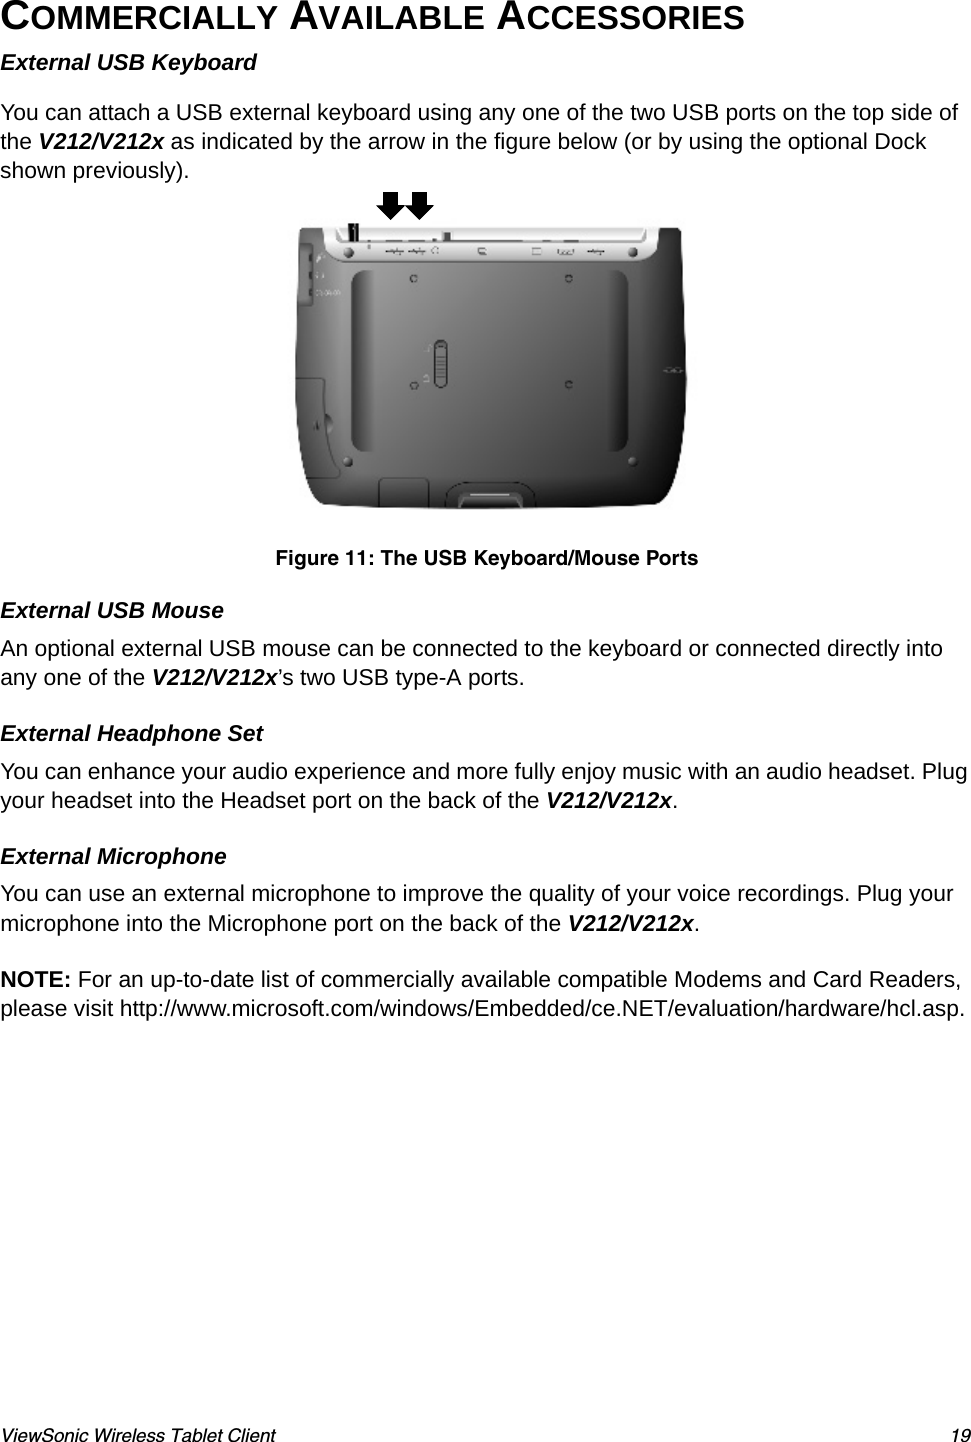 ViewSonic Wireless Tablet Client 19COMMERCIALLY AVAILABLE ACCESSORIES External USB KeyboardYou can attach a USB external keyboard using any one of the two USB ports on the top side of the V212/V212x as indicated by the arrow in the figure below (or by using the optional Dock shown previously).Figure 11: The USB Keyboard/Mouse PortsExternal USB MouseAn optional external USB mouse can be connected to the keyboard or connected directly into any one of the V212/V212x’s two USB type-A ports. External Headphone SetYou can enhance your audio experience and more fully enjoy music with an audio headset. Plug your headset into the Headset port on the back of the V212/V212x.External MicrophoneYou can use an external microphone to improve the quality of your voice recordings. Plug your microphone into the Microphone port on the back of the V212/V212x.NOTE: For an up-to-date list of commercially available compatible Modems and Card Readers, please visit http://www.microsoft.com/windows/Embedded/ce.NET/evaluation/hardware/hcl.asp.